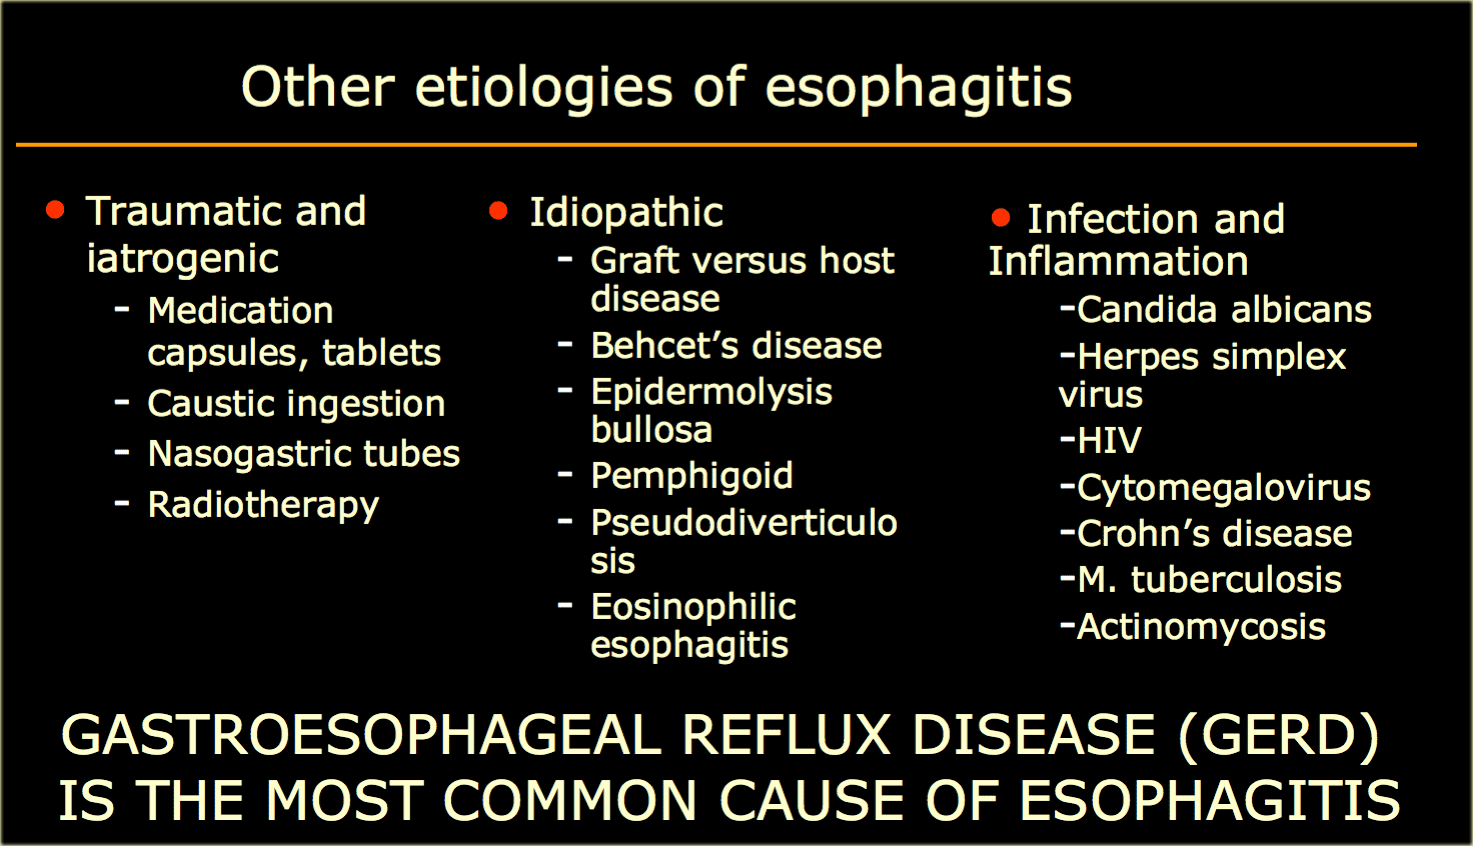 SCHATZKI'S RING OR LOWER ESOPHAGEAL WEB: A SEMANTIC AND SURGICAL ENIGMA